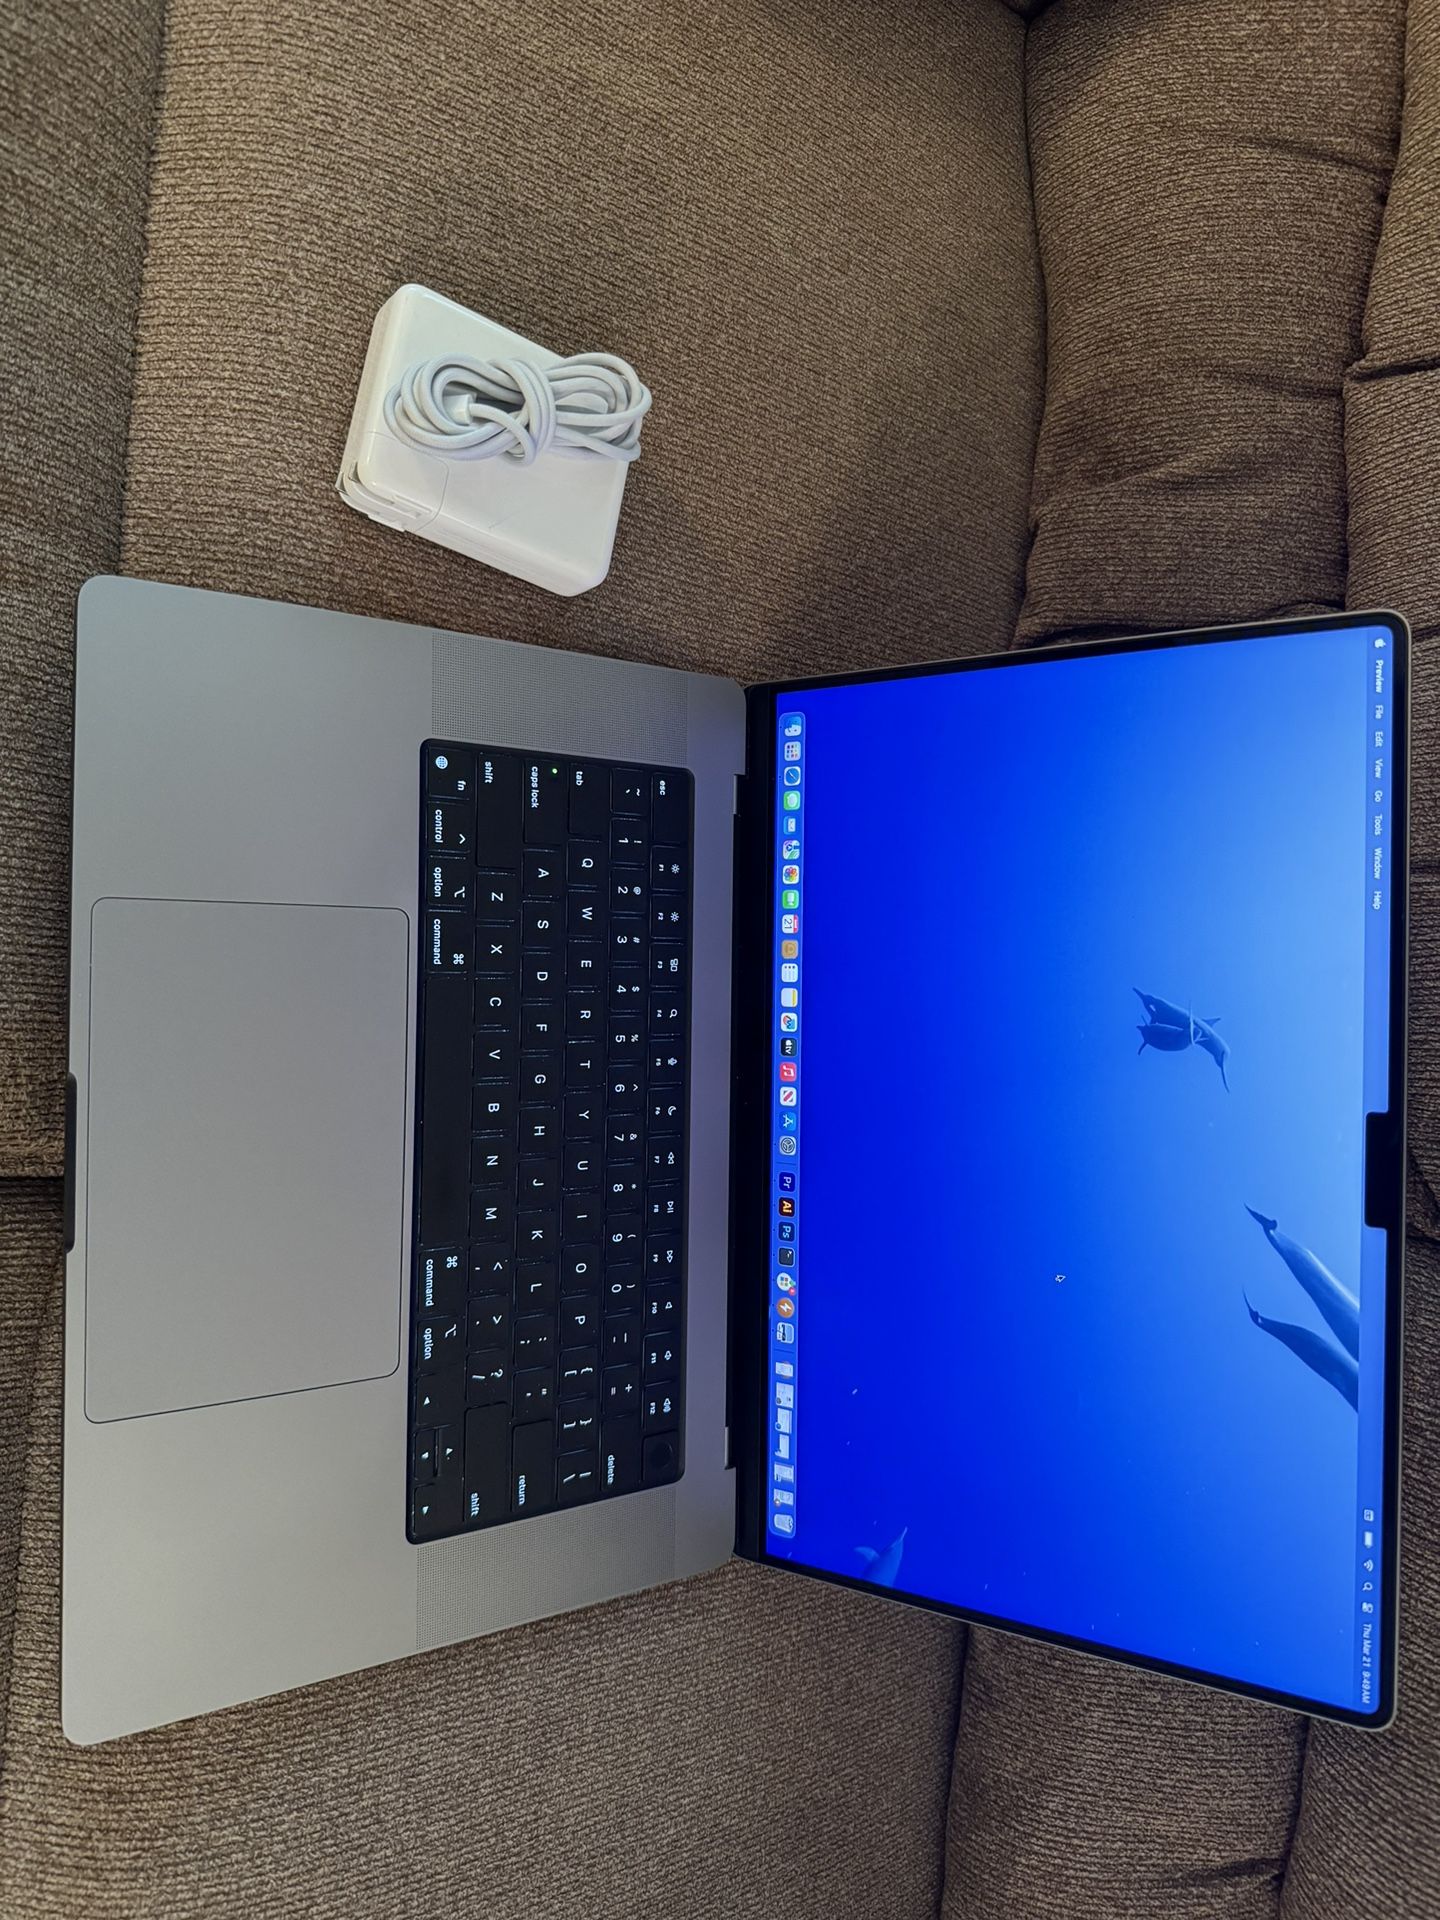 2021/2022 MacBook Pro 16” , M1 Pro ,32gb Ram, 512gb SSD, Appe Care, 81 Battery Cycle